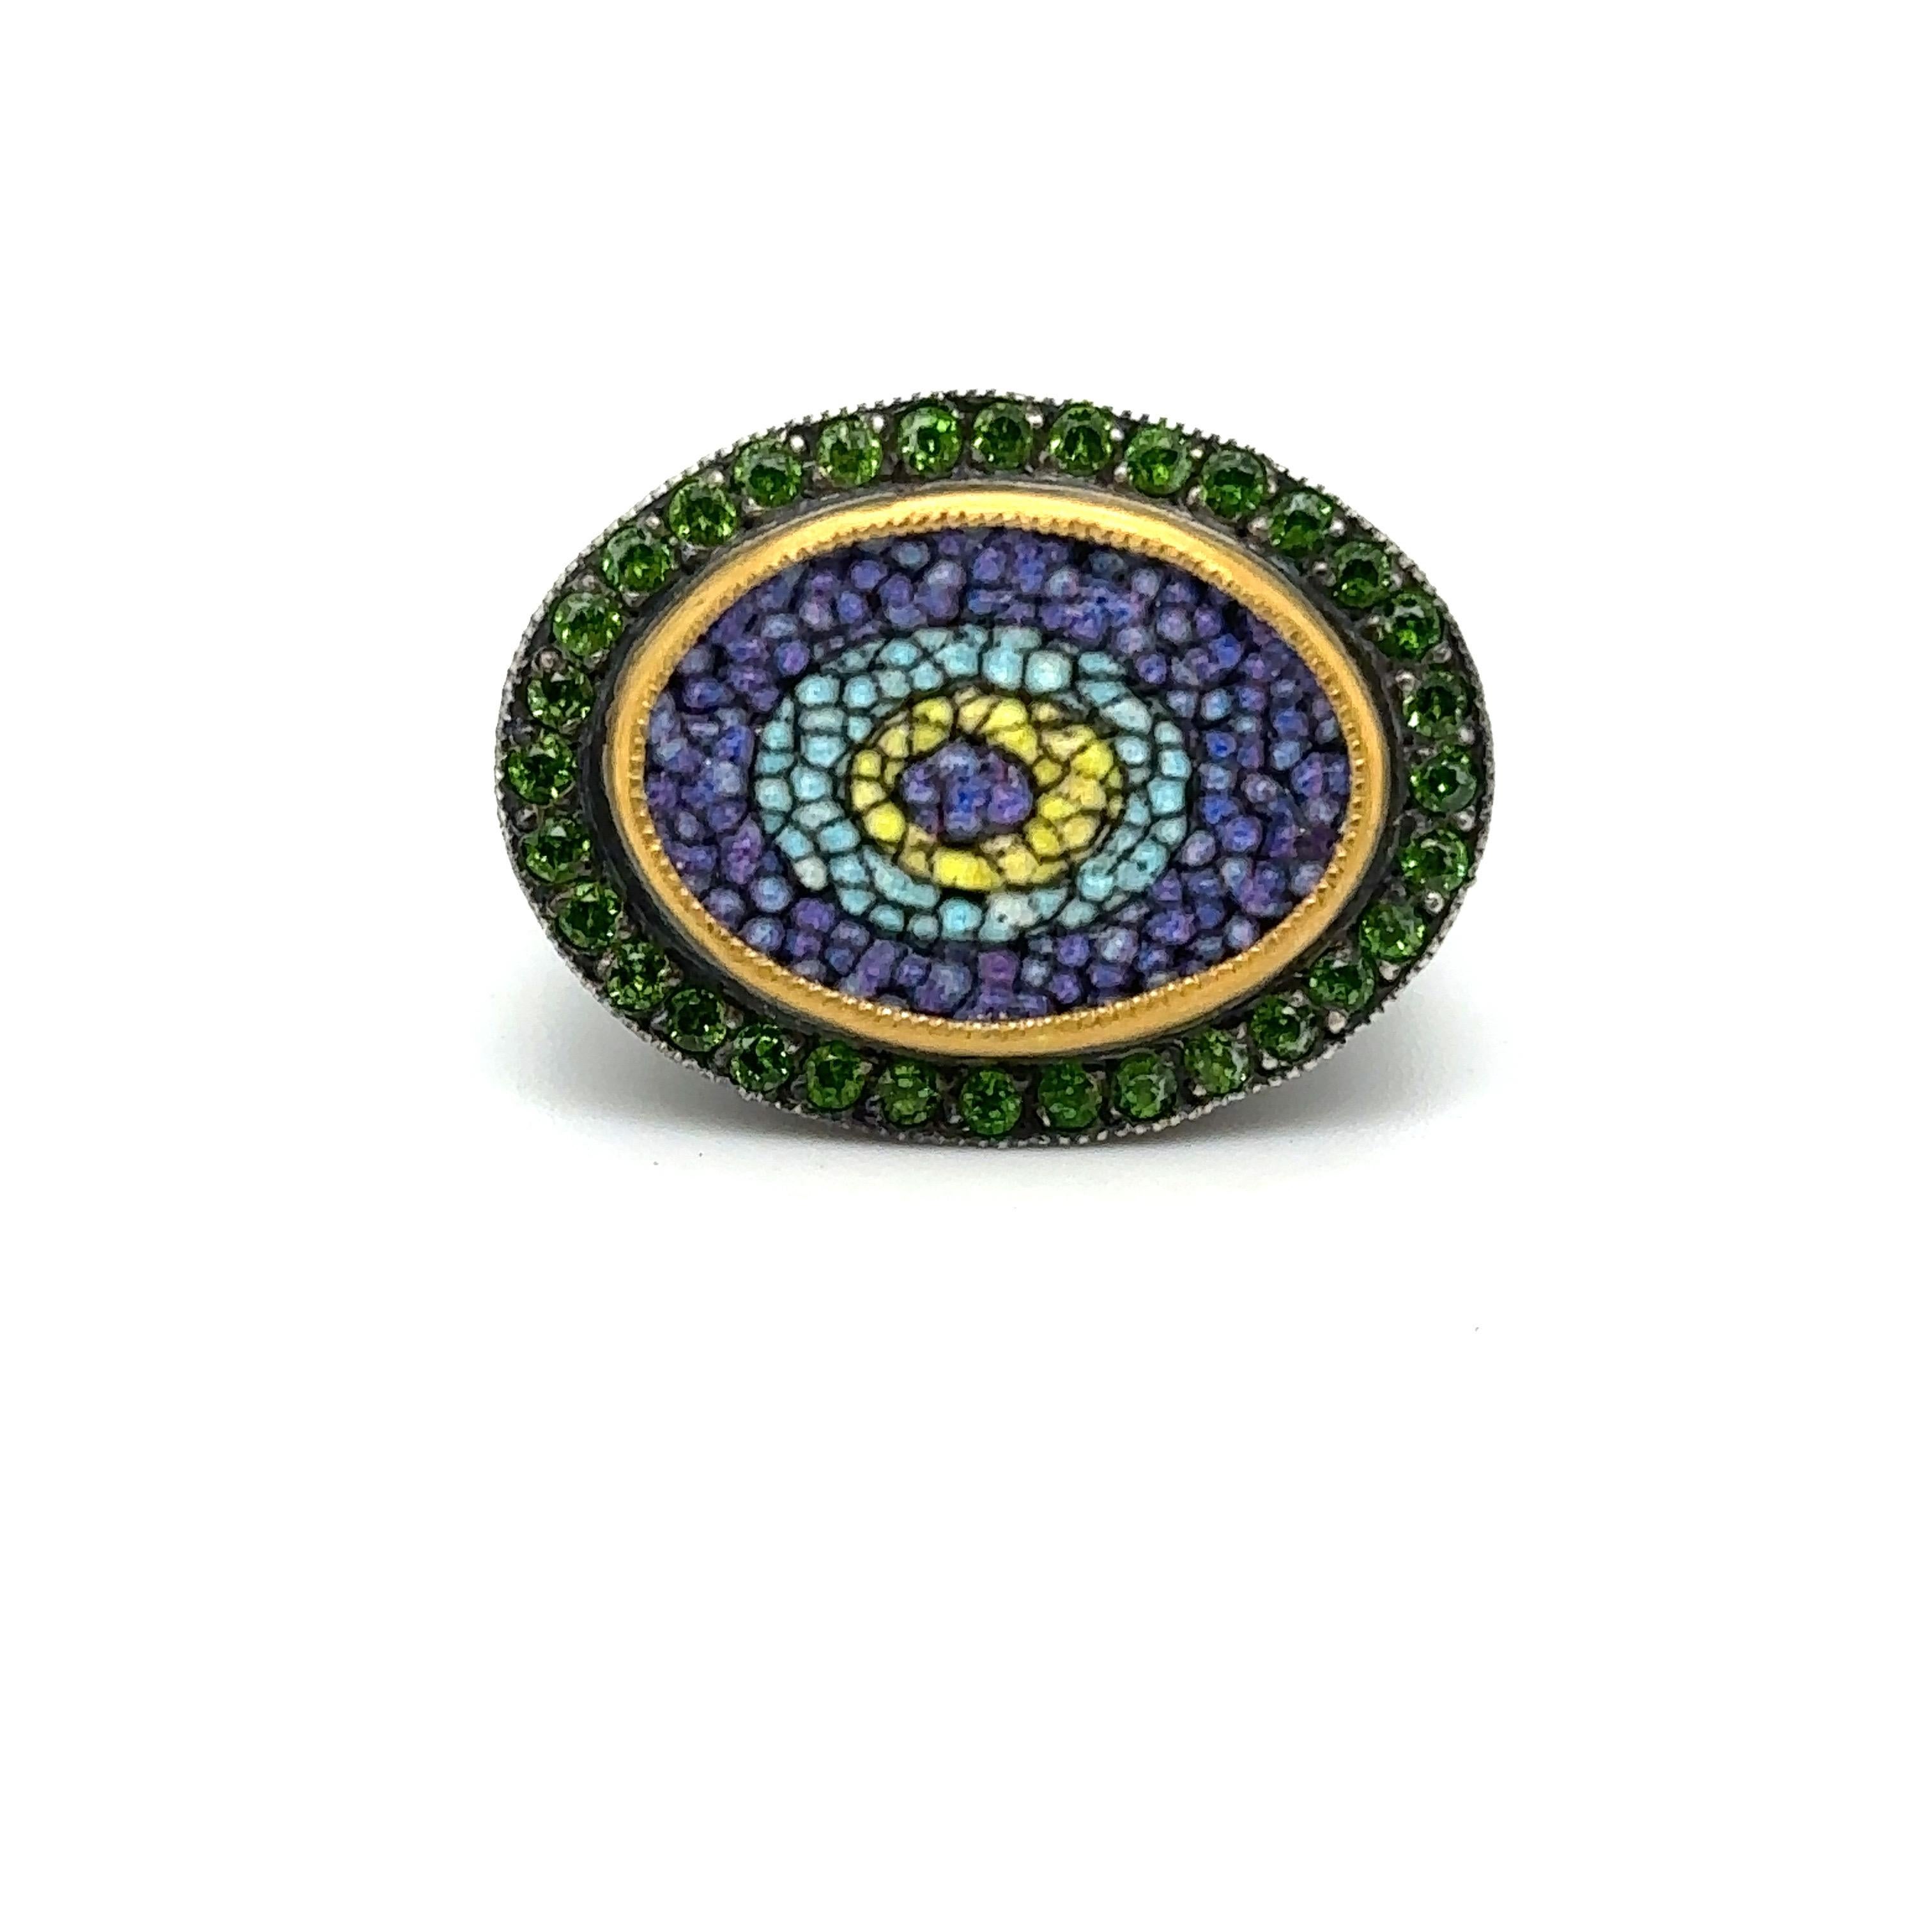 Women's JAS-19-1965 - 24KT GOLD/SS EVIL EYE MOSAIC RING with 0.60CT CHROME DIOPSIDES For Sale